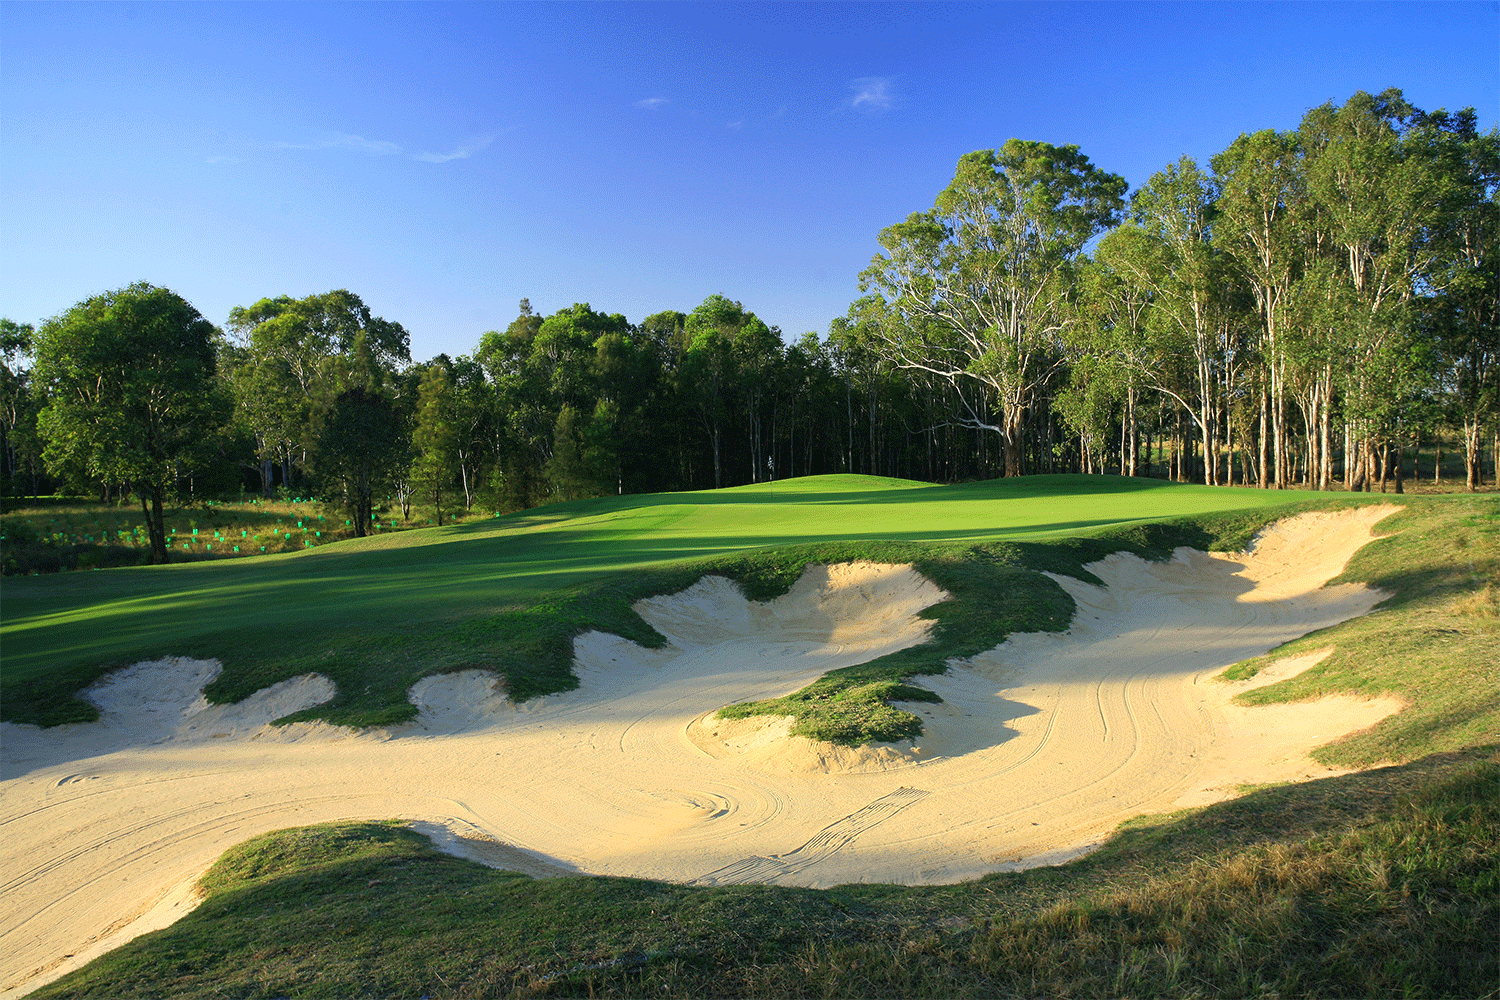 The fourth is one of the stronger par 4s.